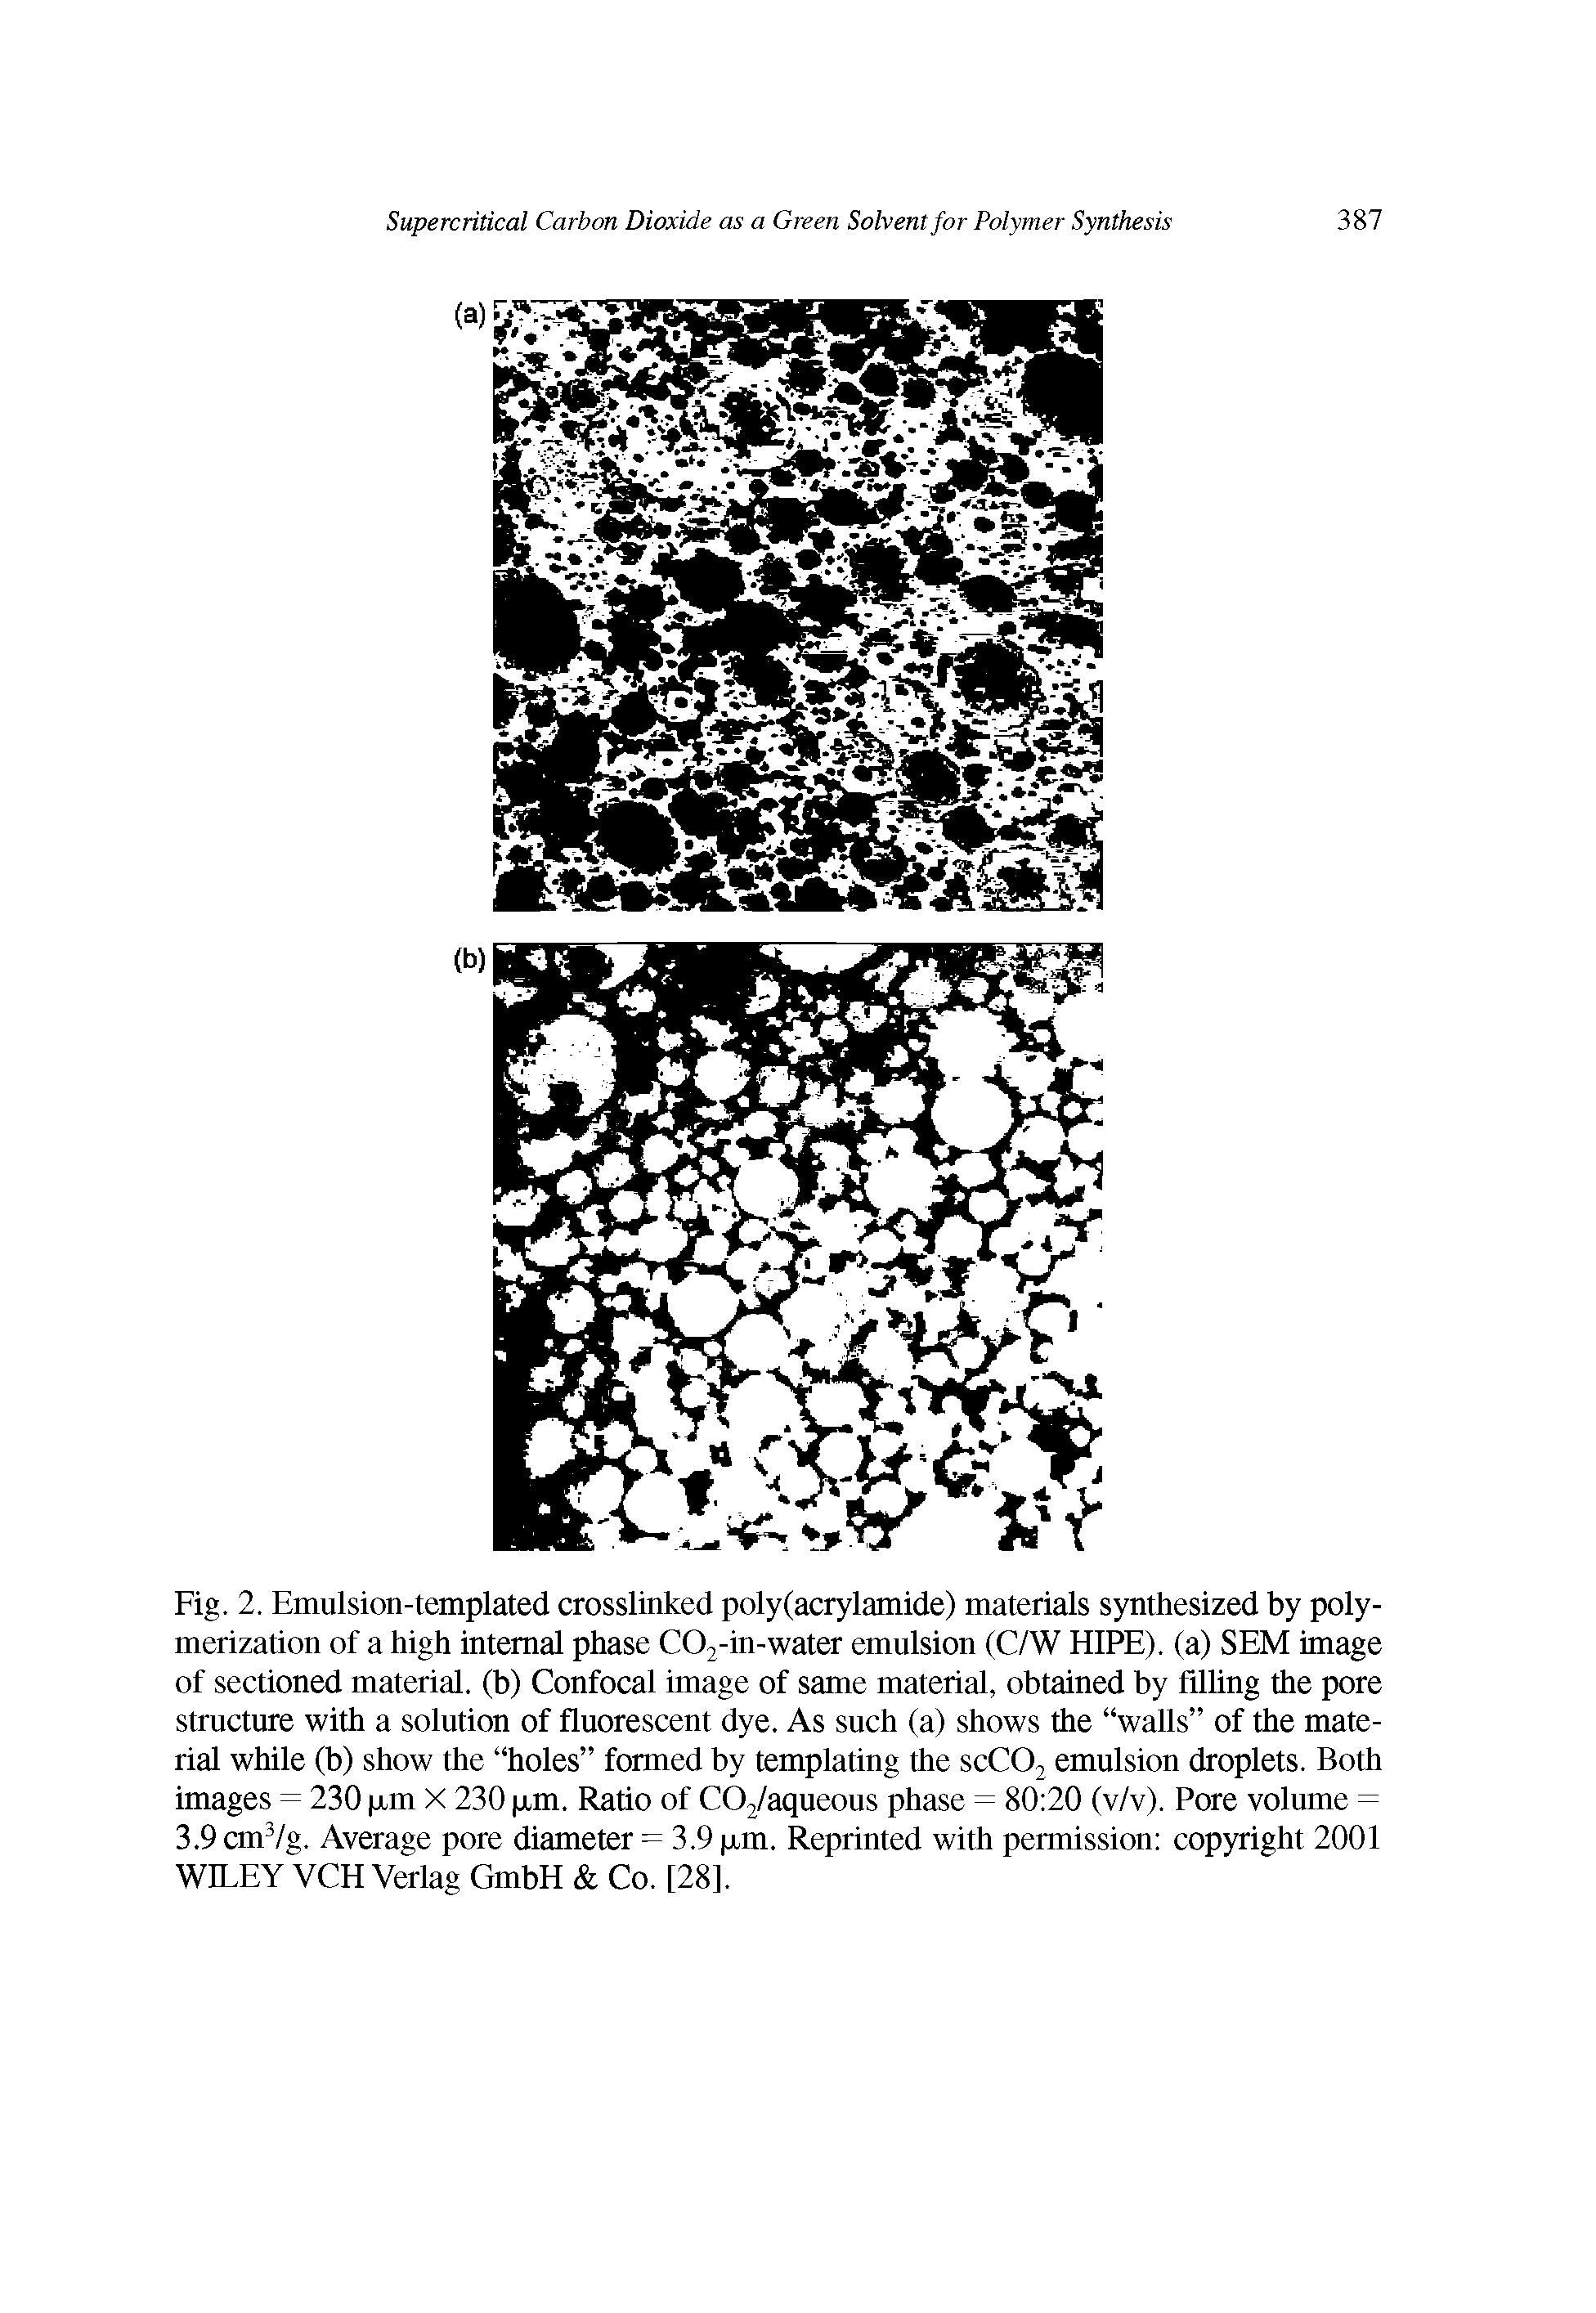 Fig. 2. Emulsion-templated crosslinked poly(acrylamide) materials synthesized by polymerization of a high internal phase C02-in-water emulsion (C/W HIPE). (a) SEM image of sectioned material, (b) Confocal image of same material, obtained by filling the pore structure with a solution of fluorescent dye. As such (a) shows the walls of the material while (b) show the holes formed by templating the SCCO2 emulsion droplets. Both images = 230 iJim X 230 jjim. Ratio of C02/aqueous phase = 80 20 (v/v). Pore volume = 3.9 cm /g. Average pore diameter = 3.9 jjim. Reprinted with permission copyright 2001 WILEY VCH Verlag GmbH Co. [28].